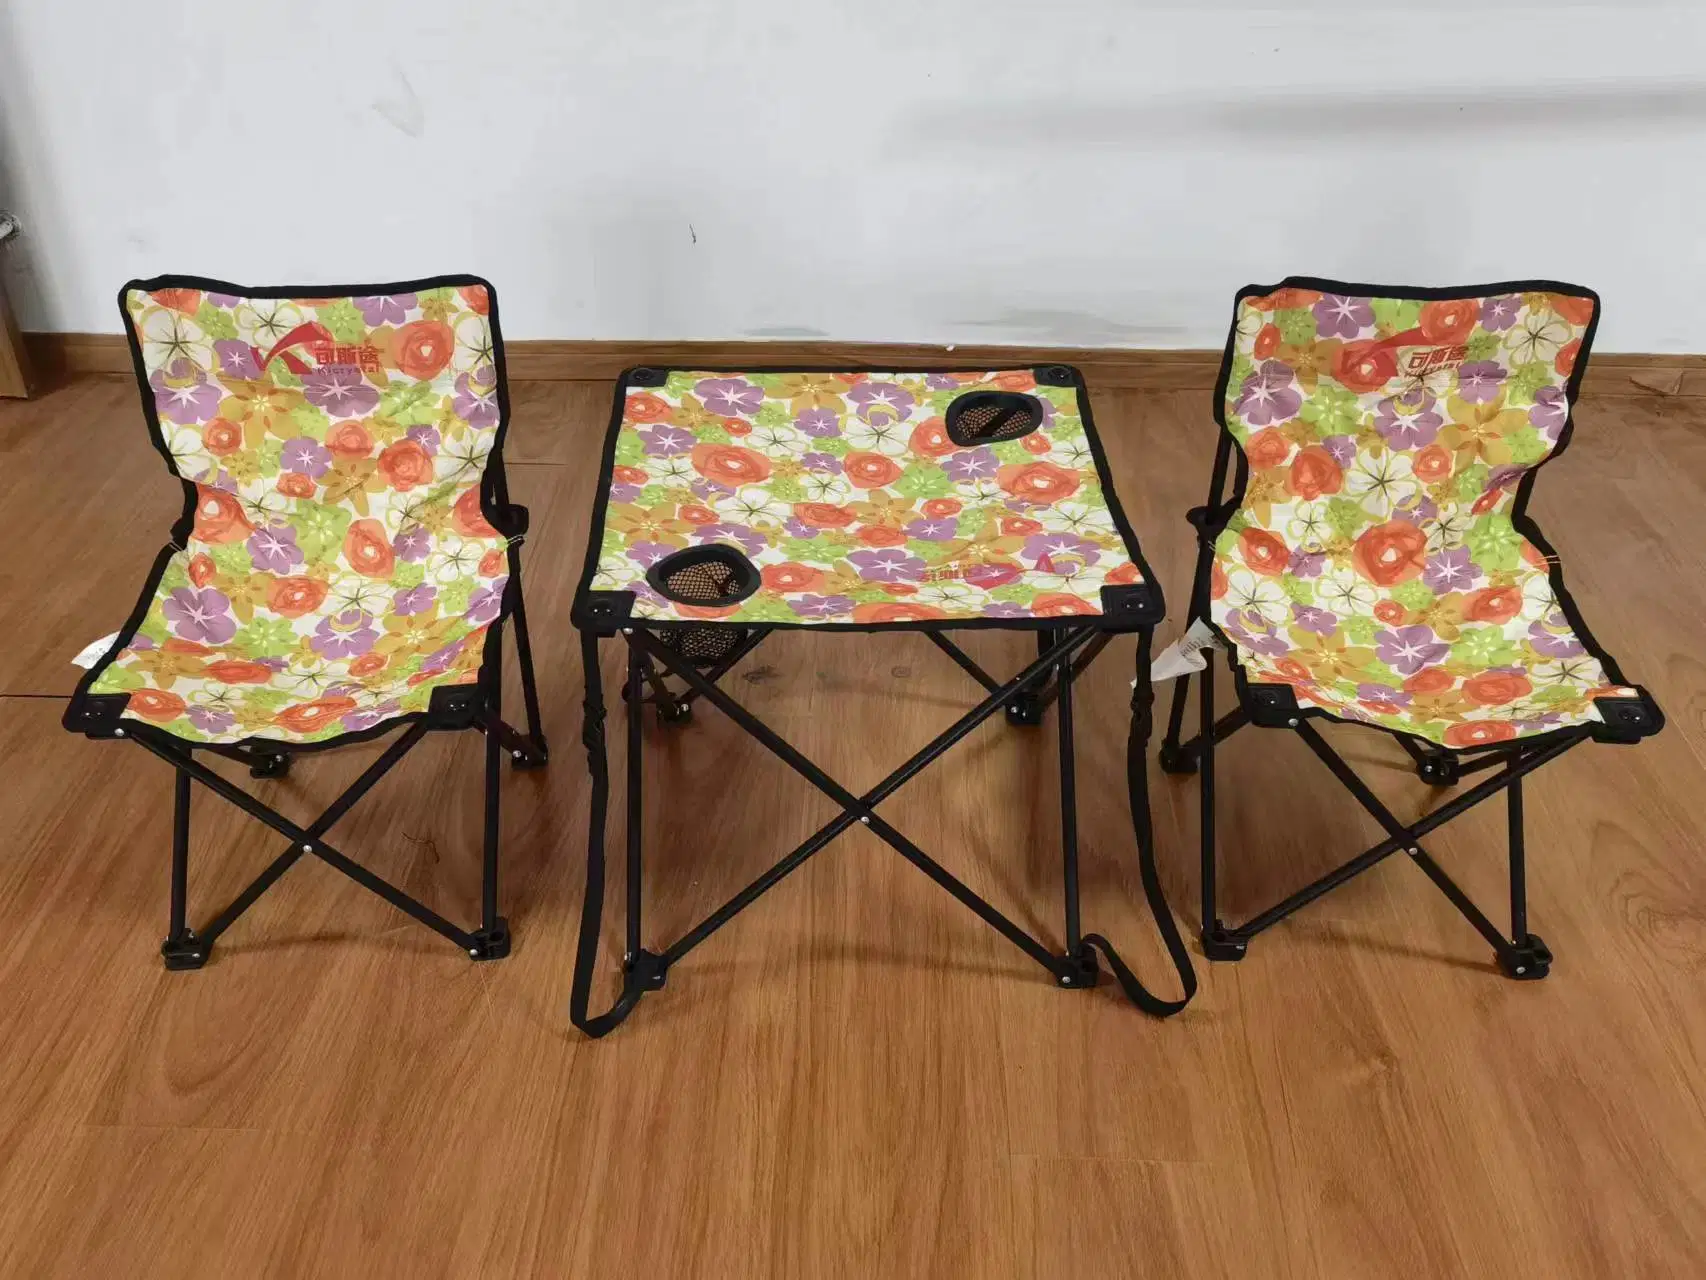 Outdoor Folding Table Portable Picnic Camping Picnic Table and Chair Set Canvas Table Night Market Stall Stall Small Table